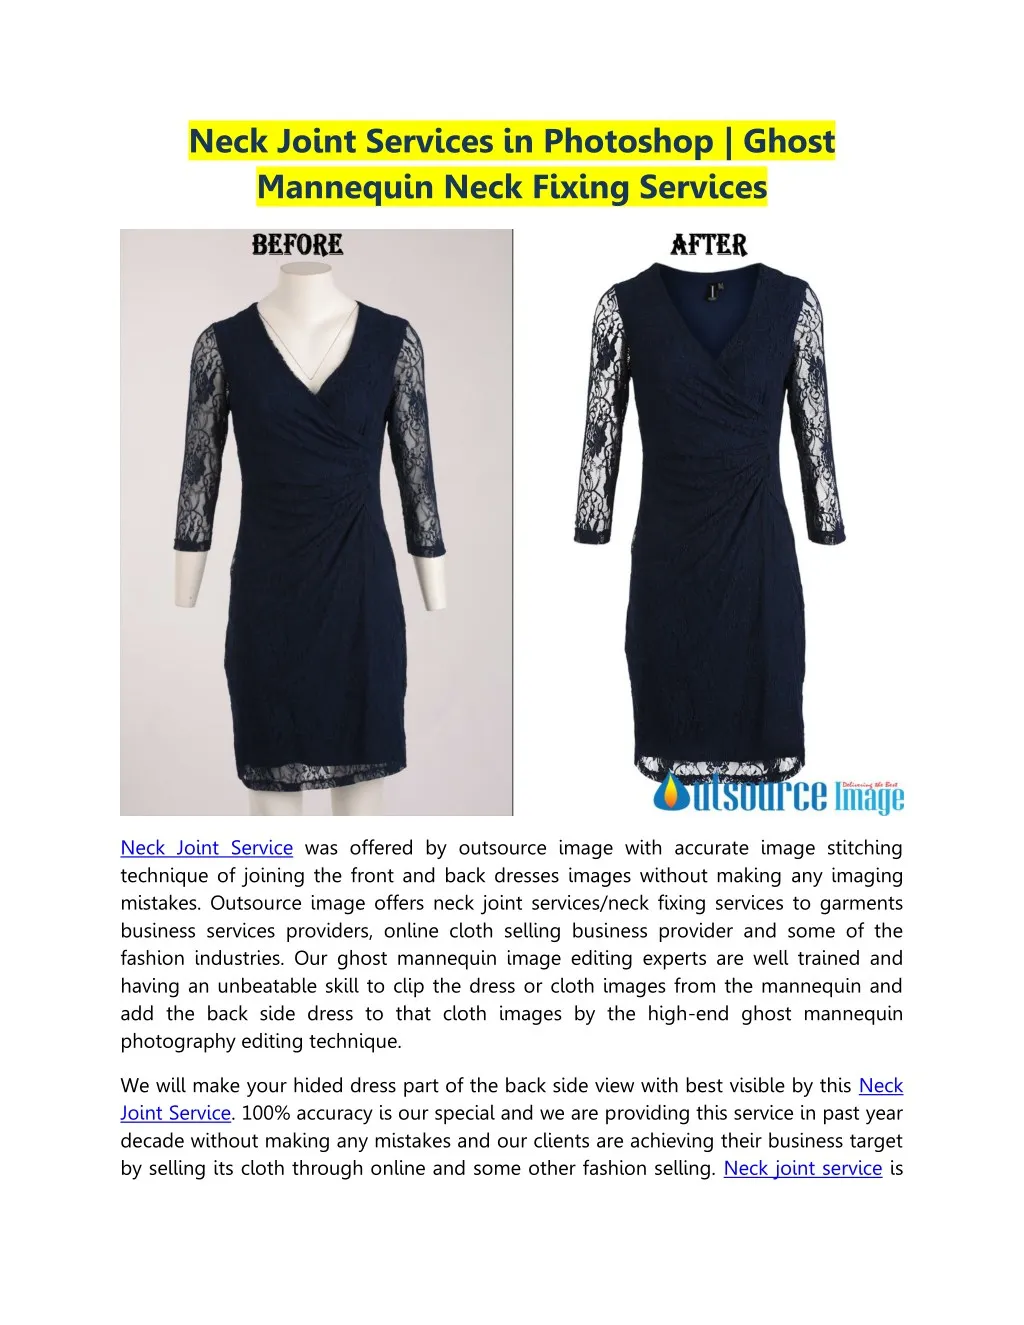 neck joint services in photoshop ghost mannequin